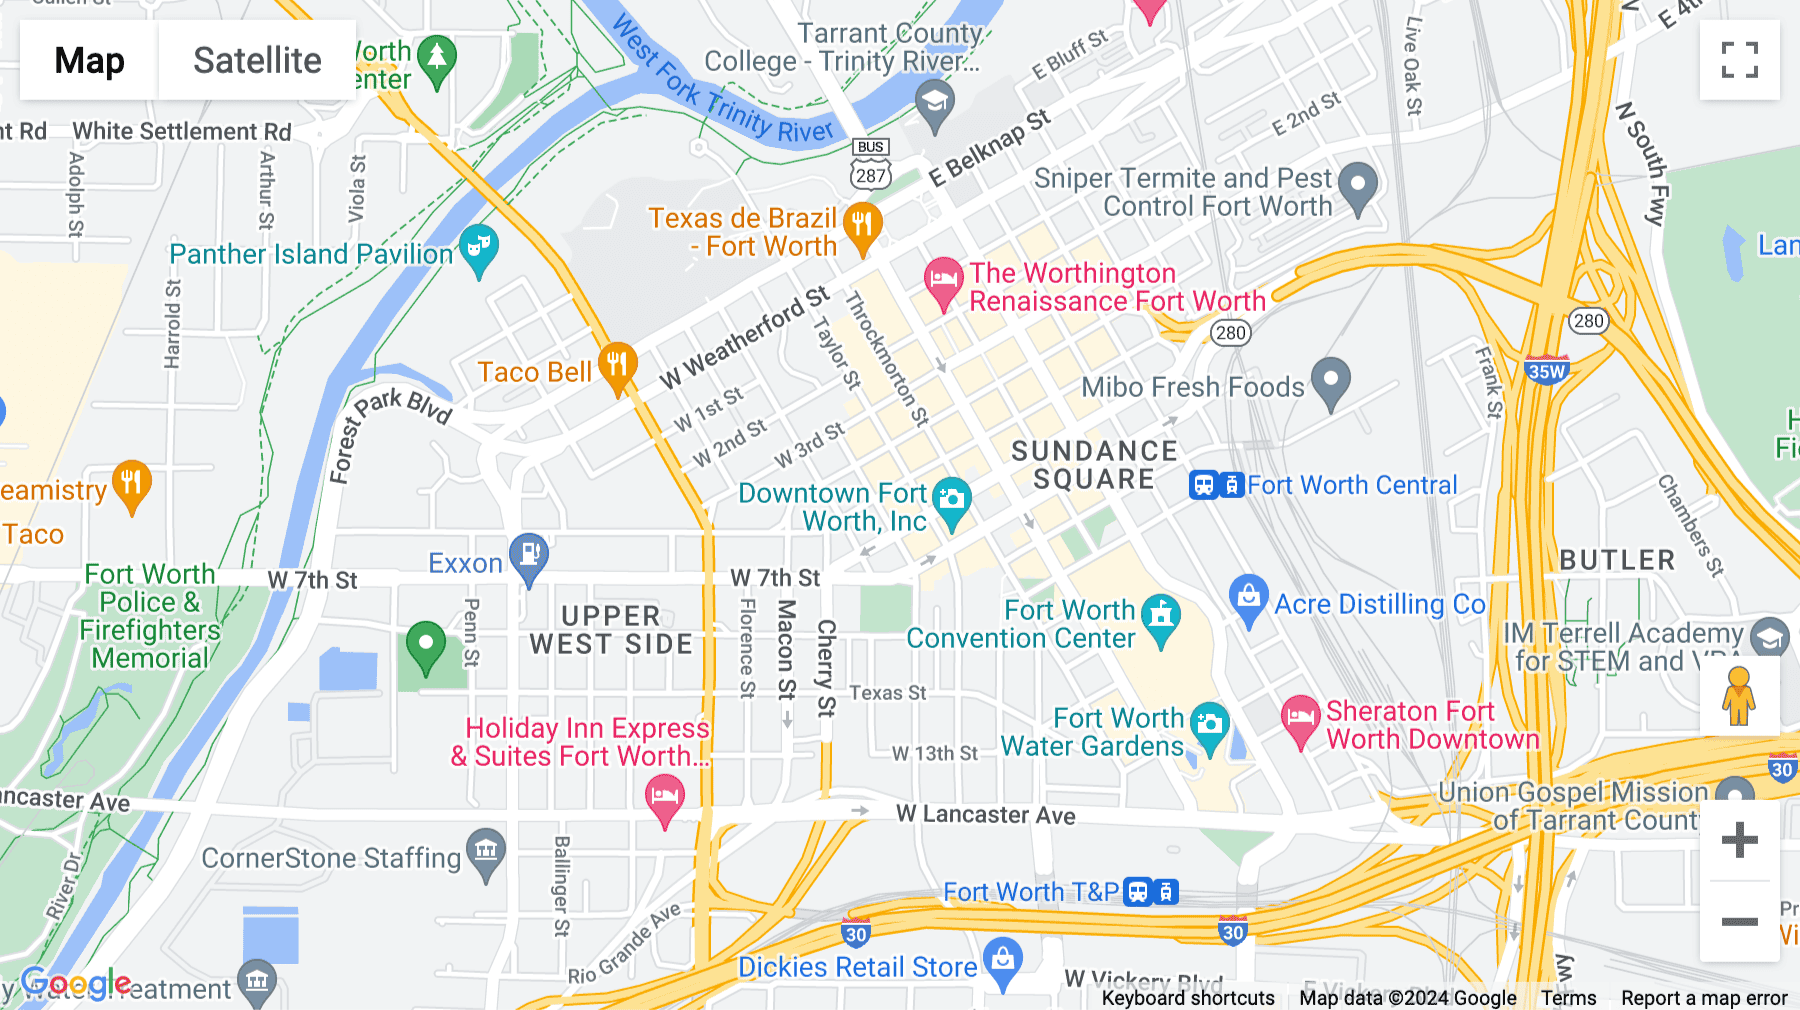 Click for interative map of 640 Taylor Street, Suite 1200, Fort Worth (Texas)